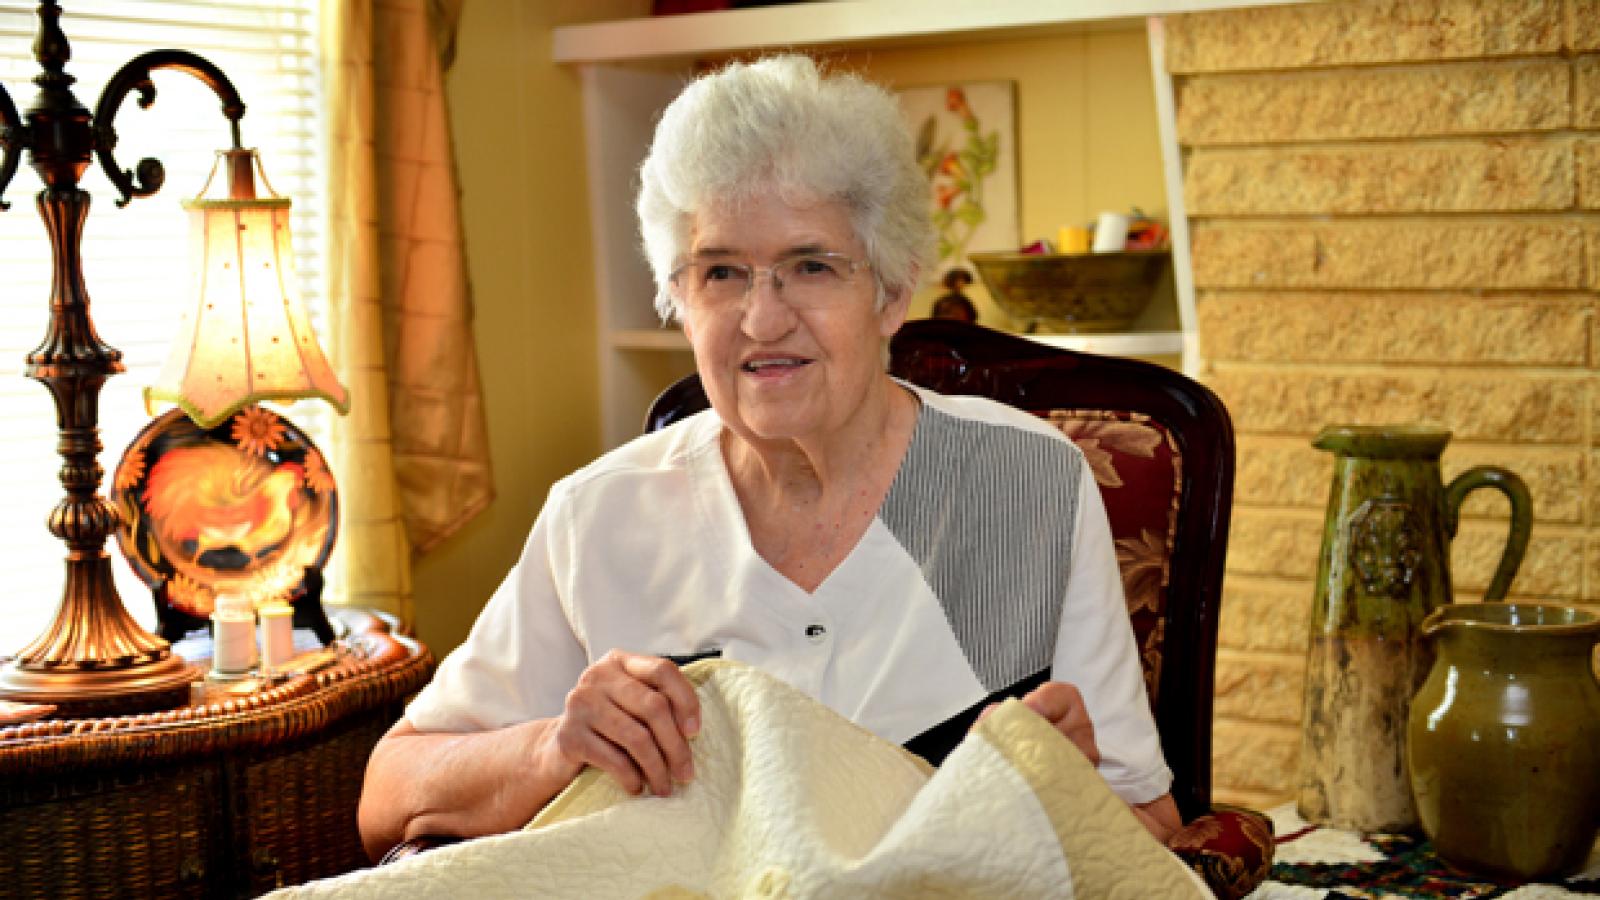 A woman sitting in a chair holds a quilt